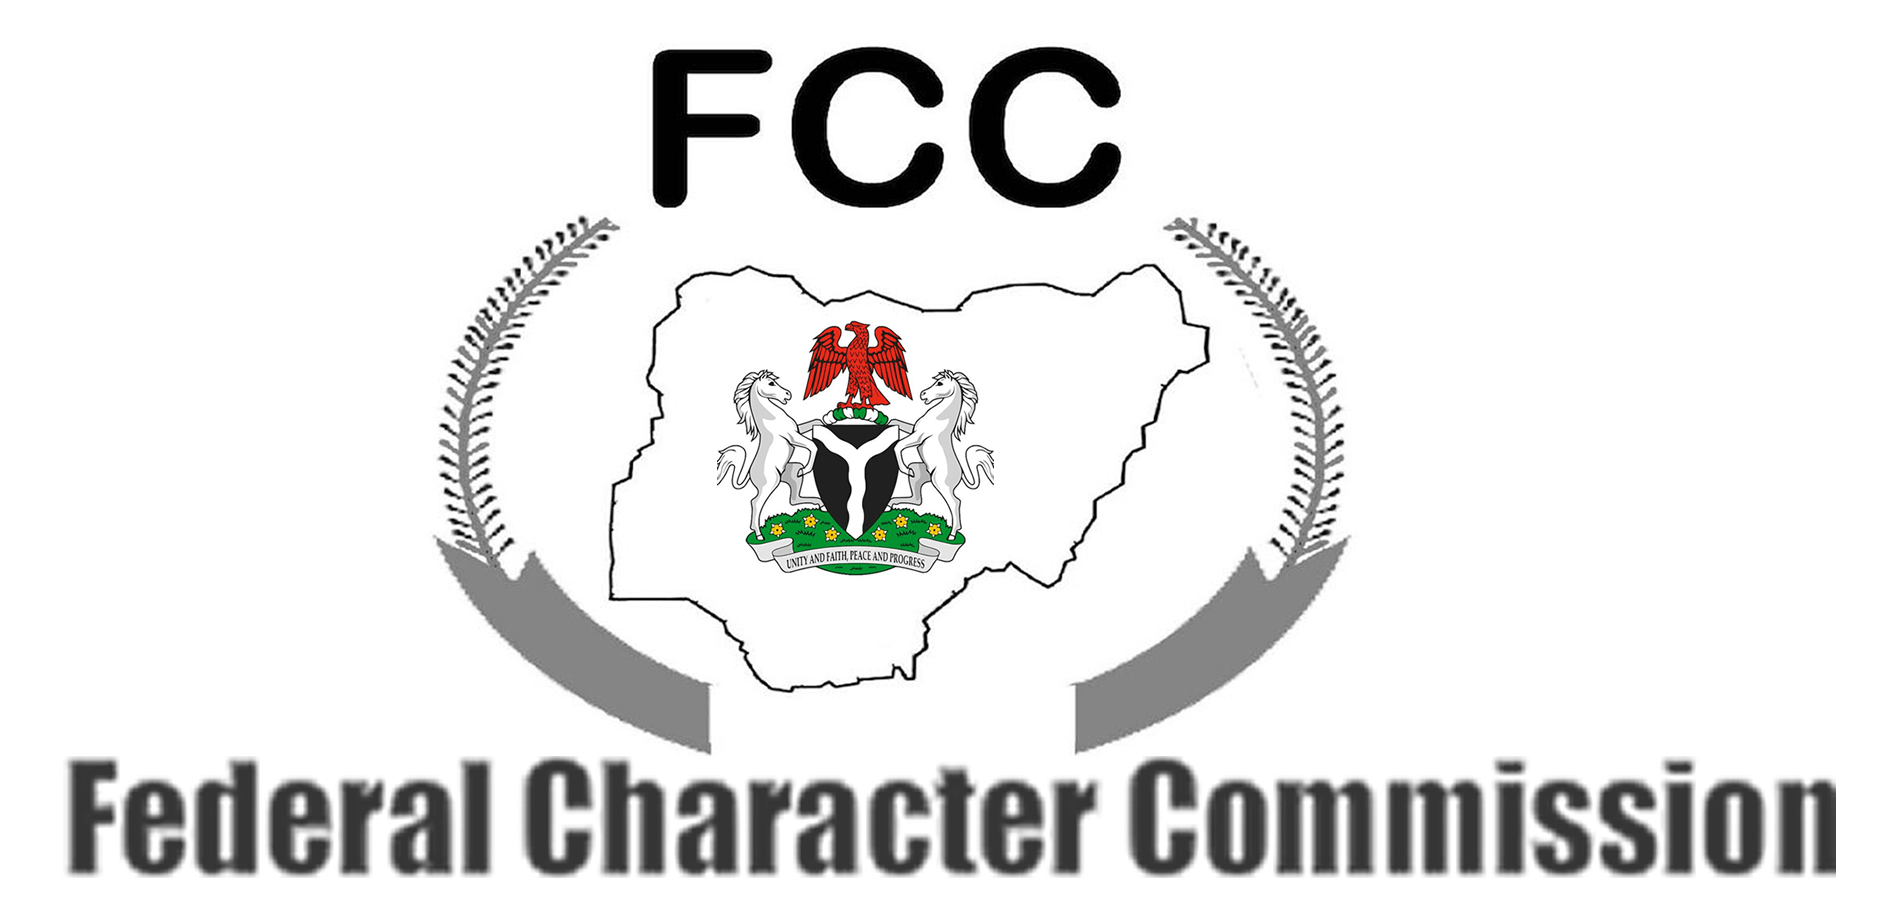 Job racketeering: I collected millions for Chairman - Ex-FCC staff alleges